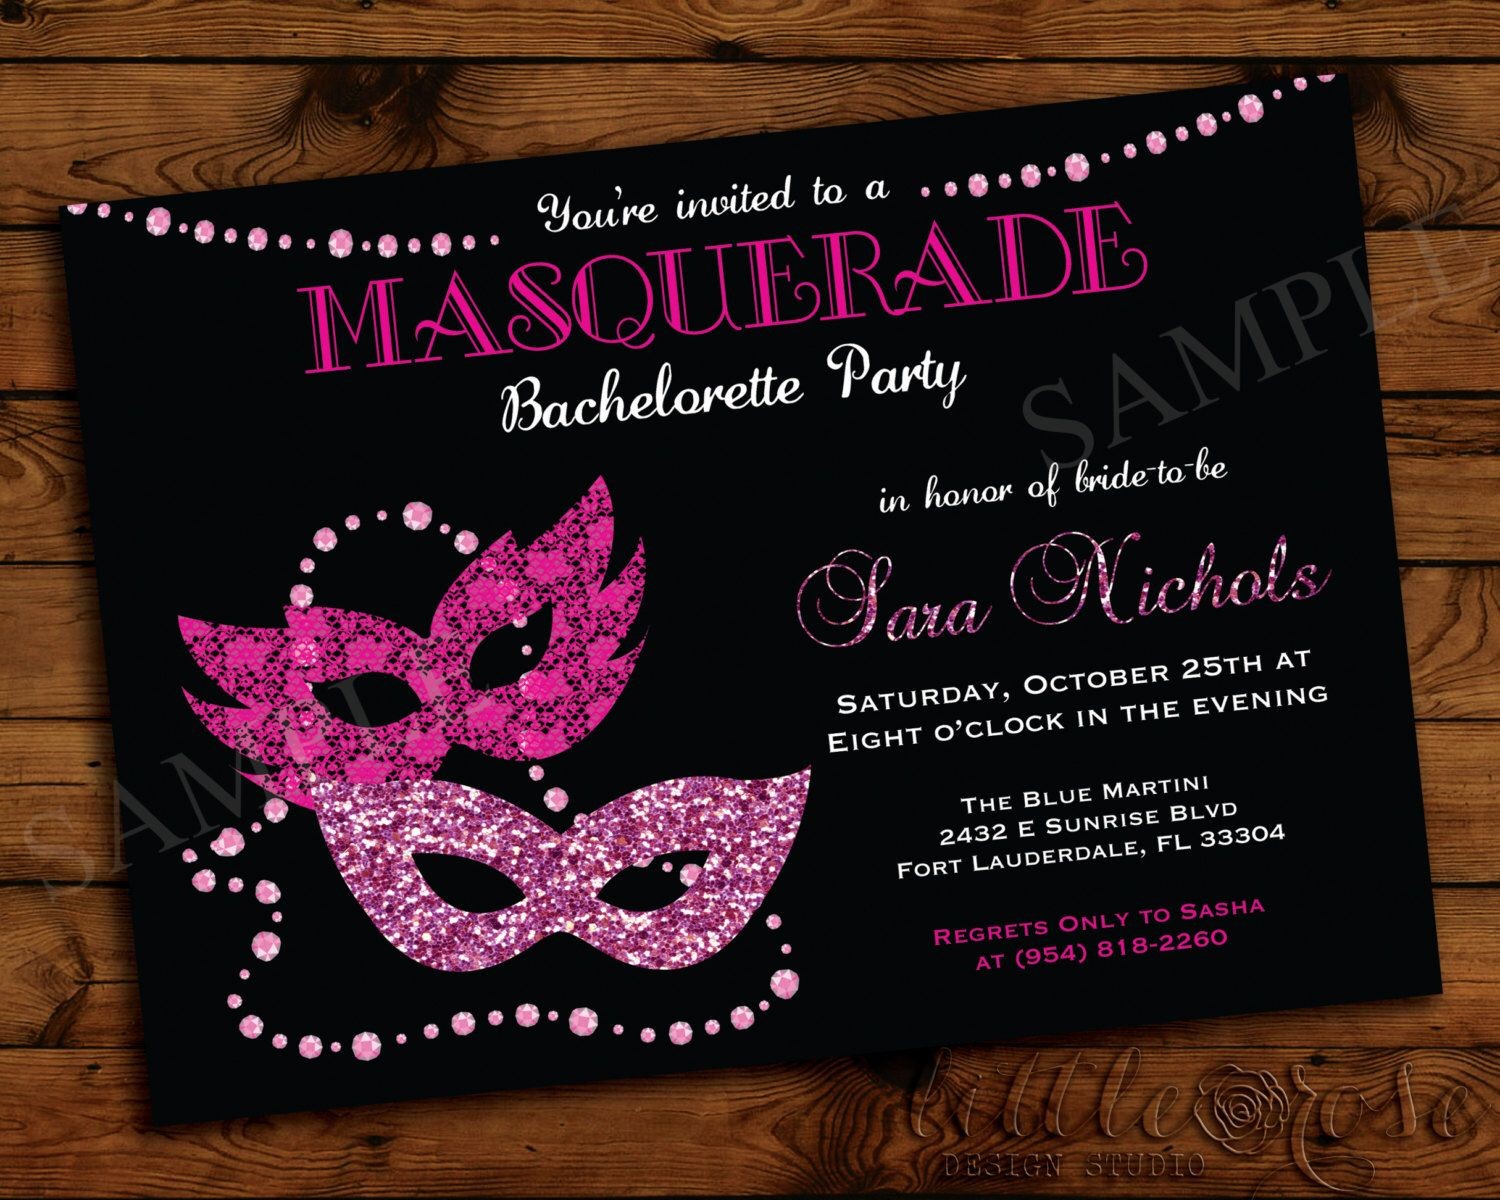 Pin By Danielle Peab Dy On Batchlorette Party In 2018 Pinterest Document Masquerade Bachelorette Invitations